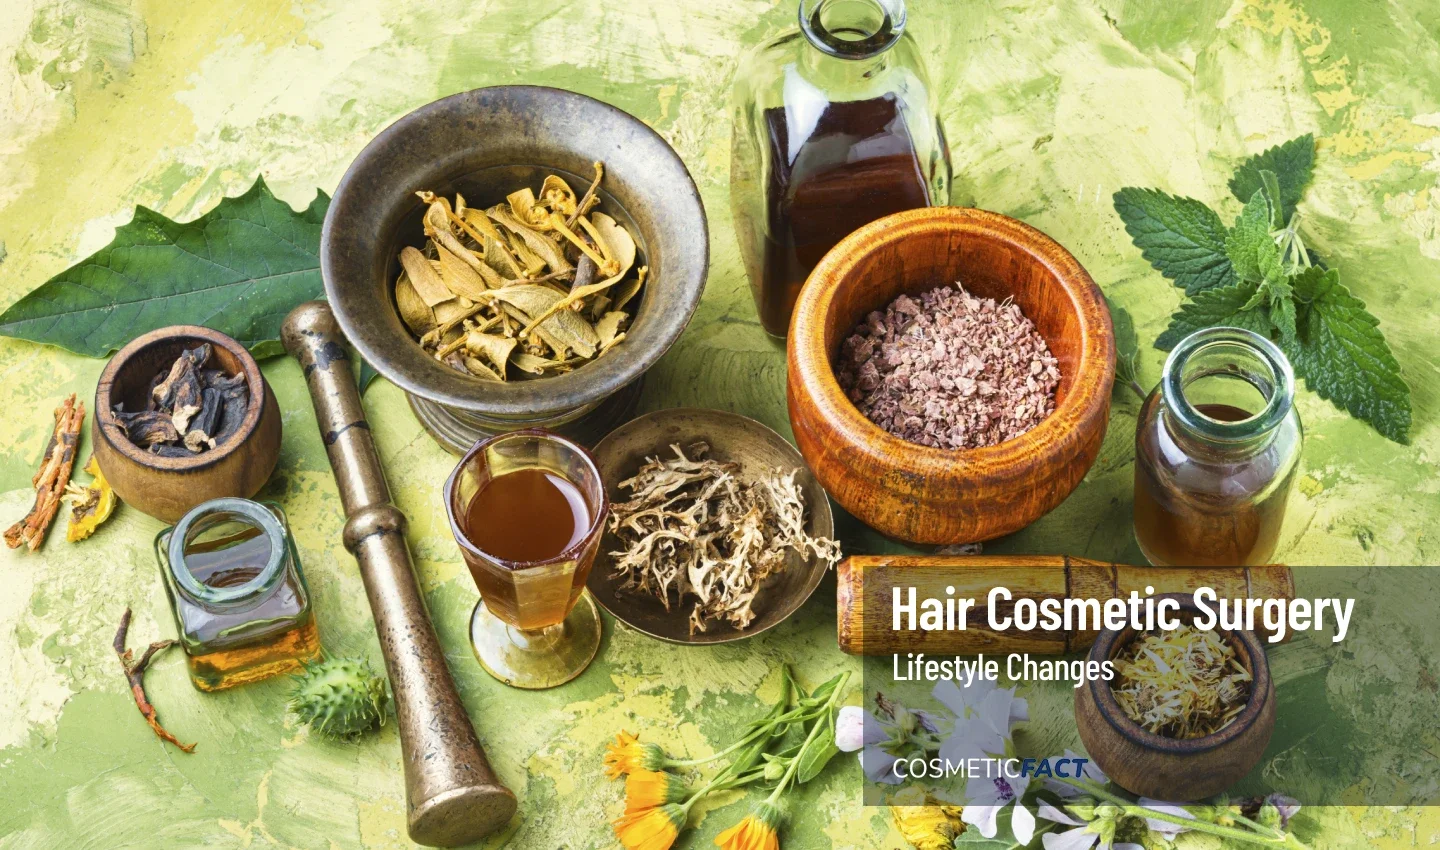 A photo of traditional food items such as rosemary, onions, and eggs, which are natural solutions for thinning hair.